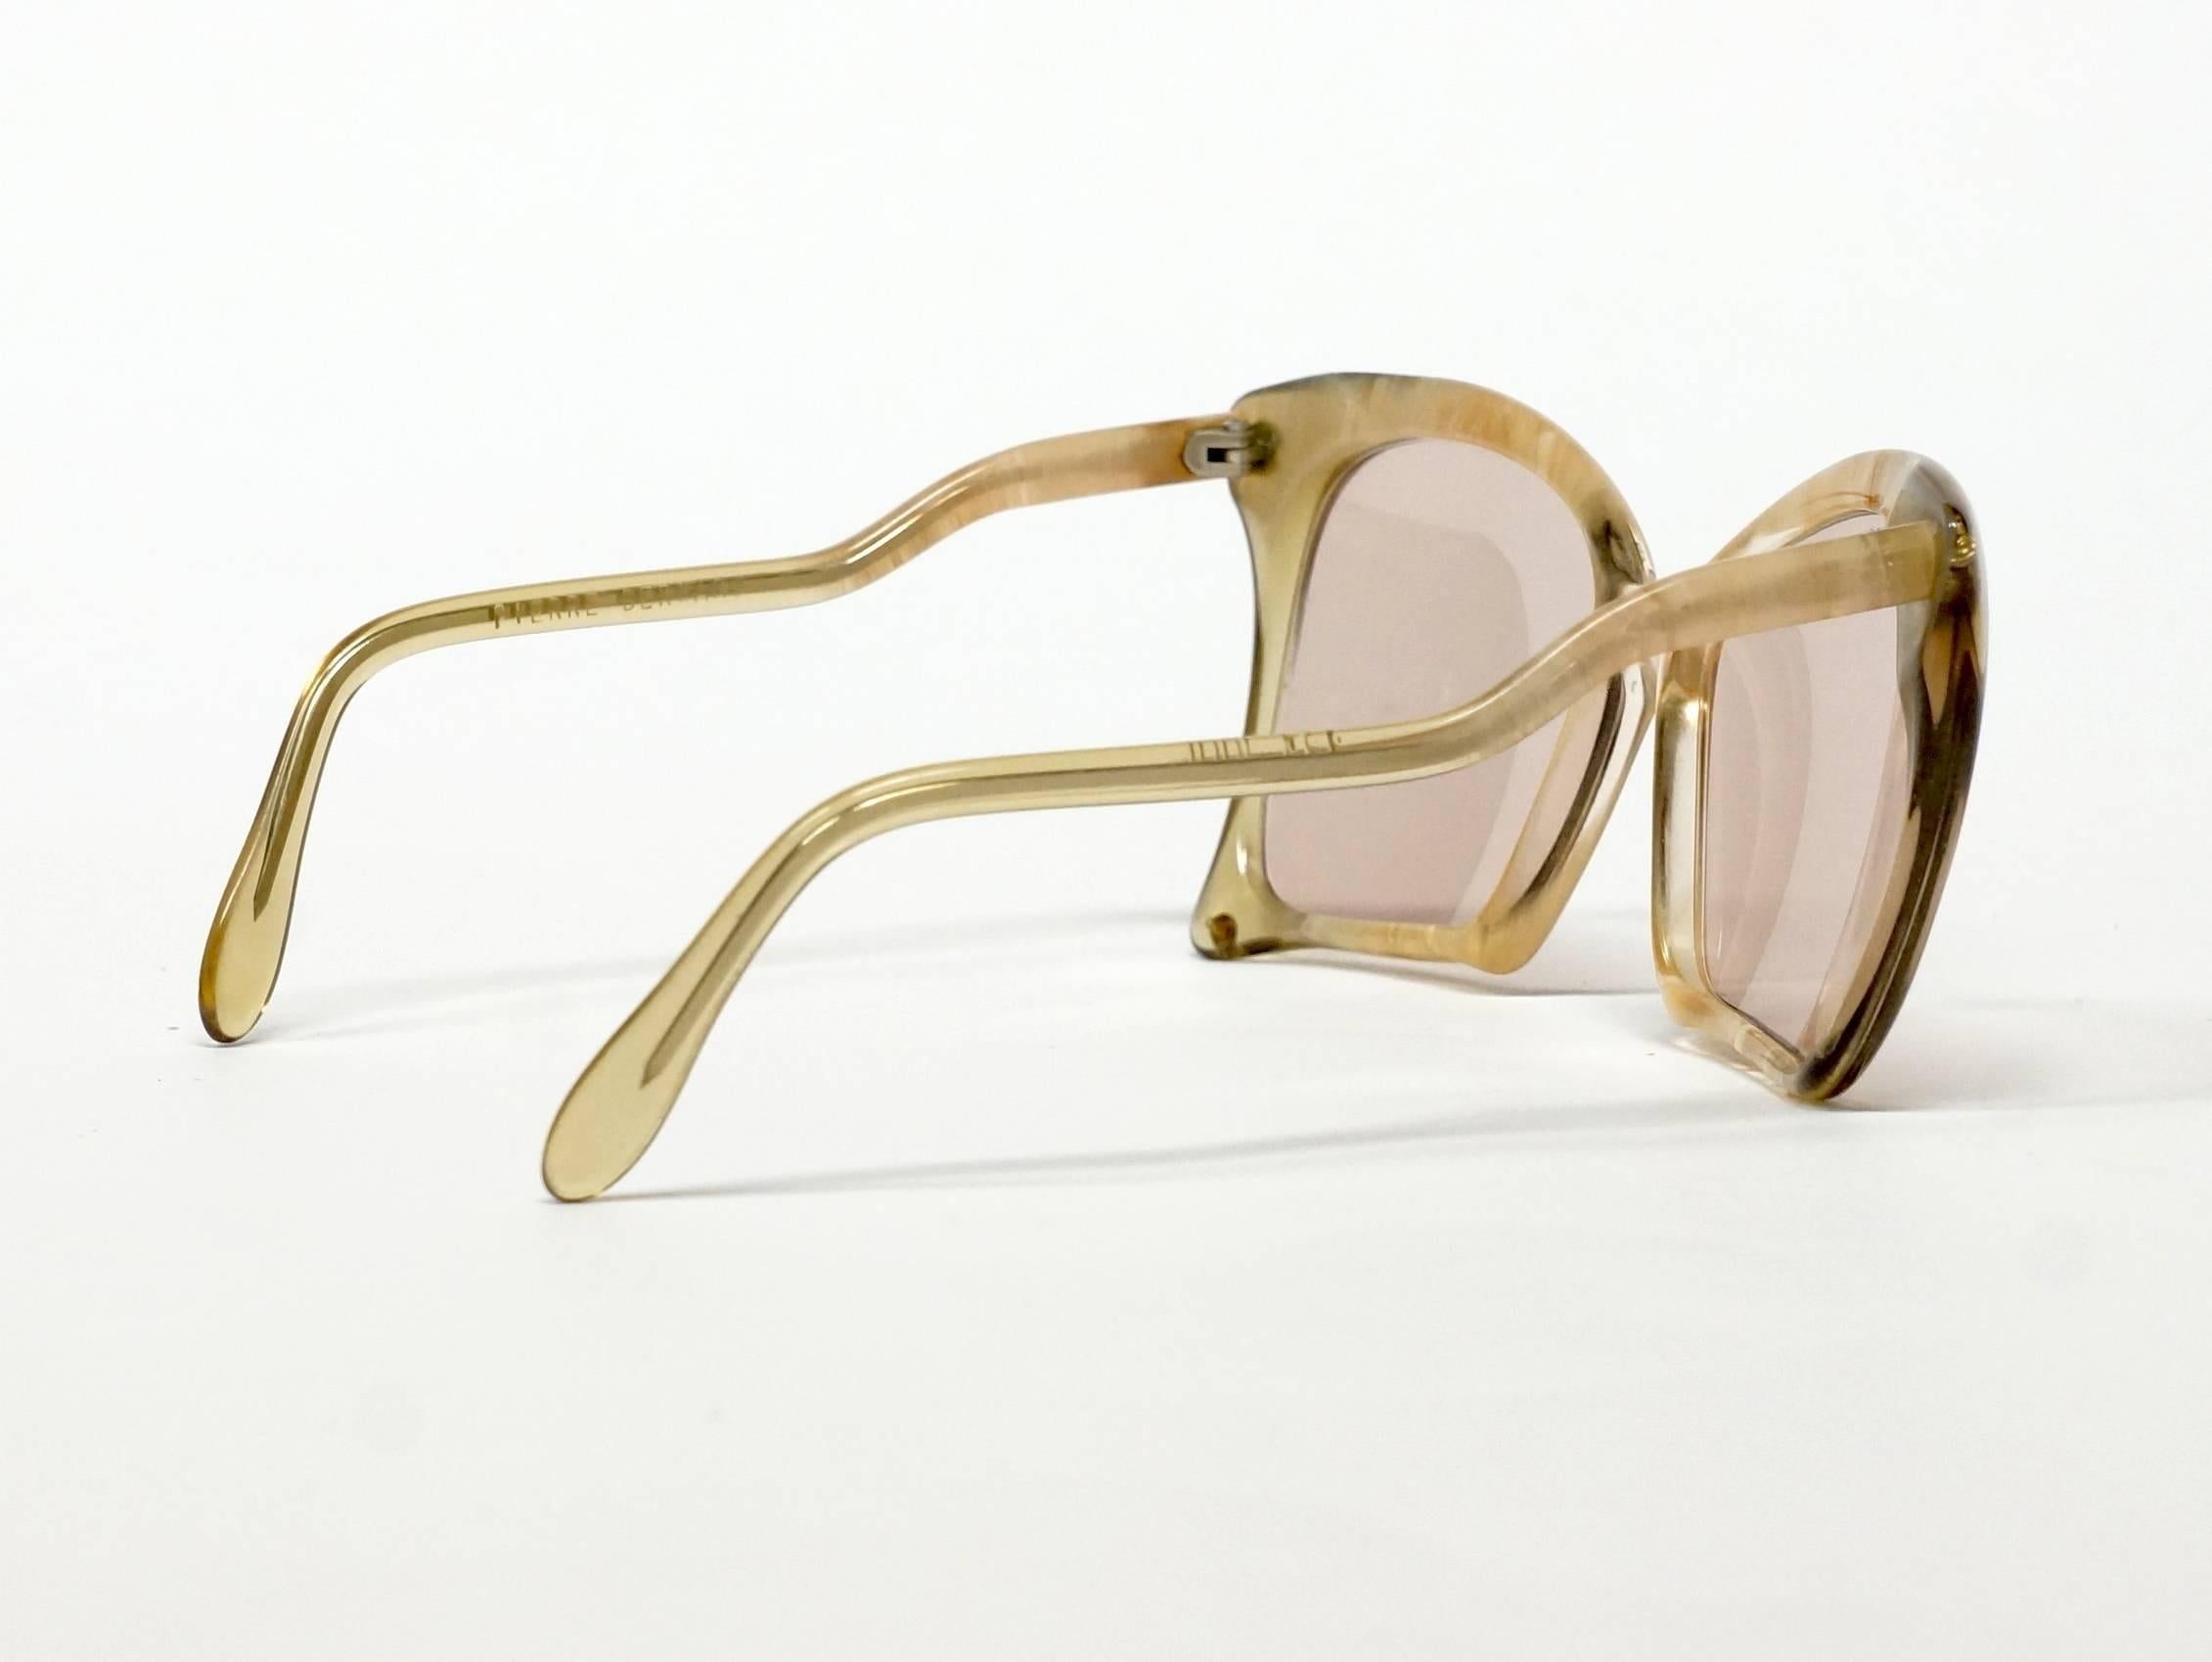 Women's 1970s Pierre Bernard Butterfly Shaped Sunglasses in New Old Stock Condition For Sale